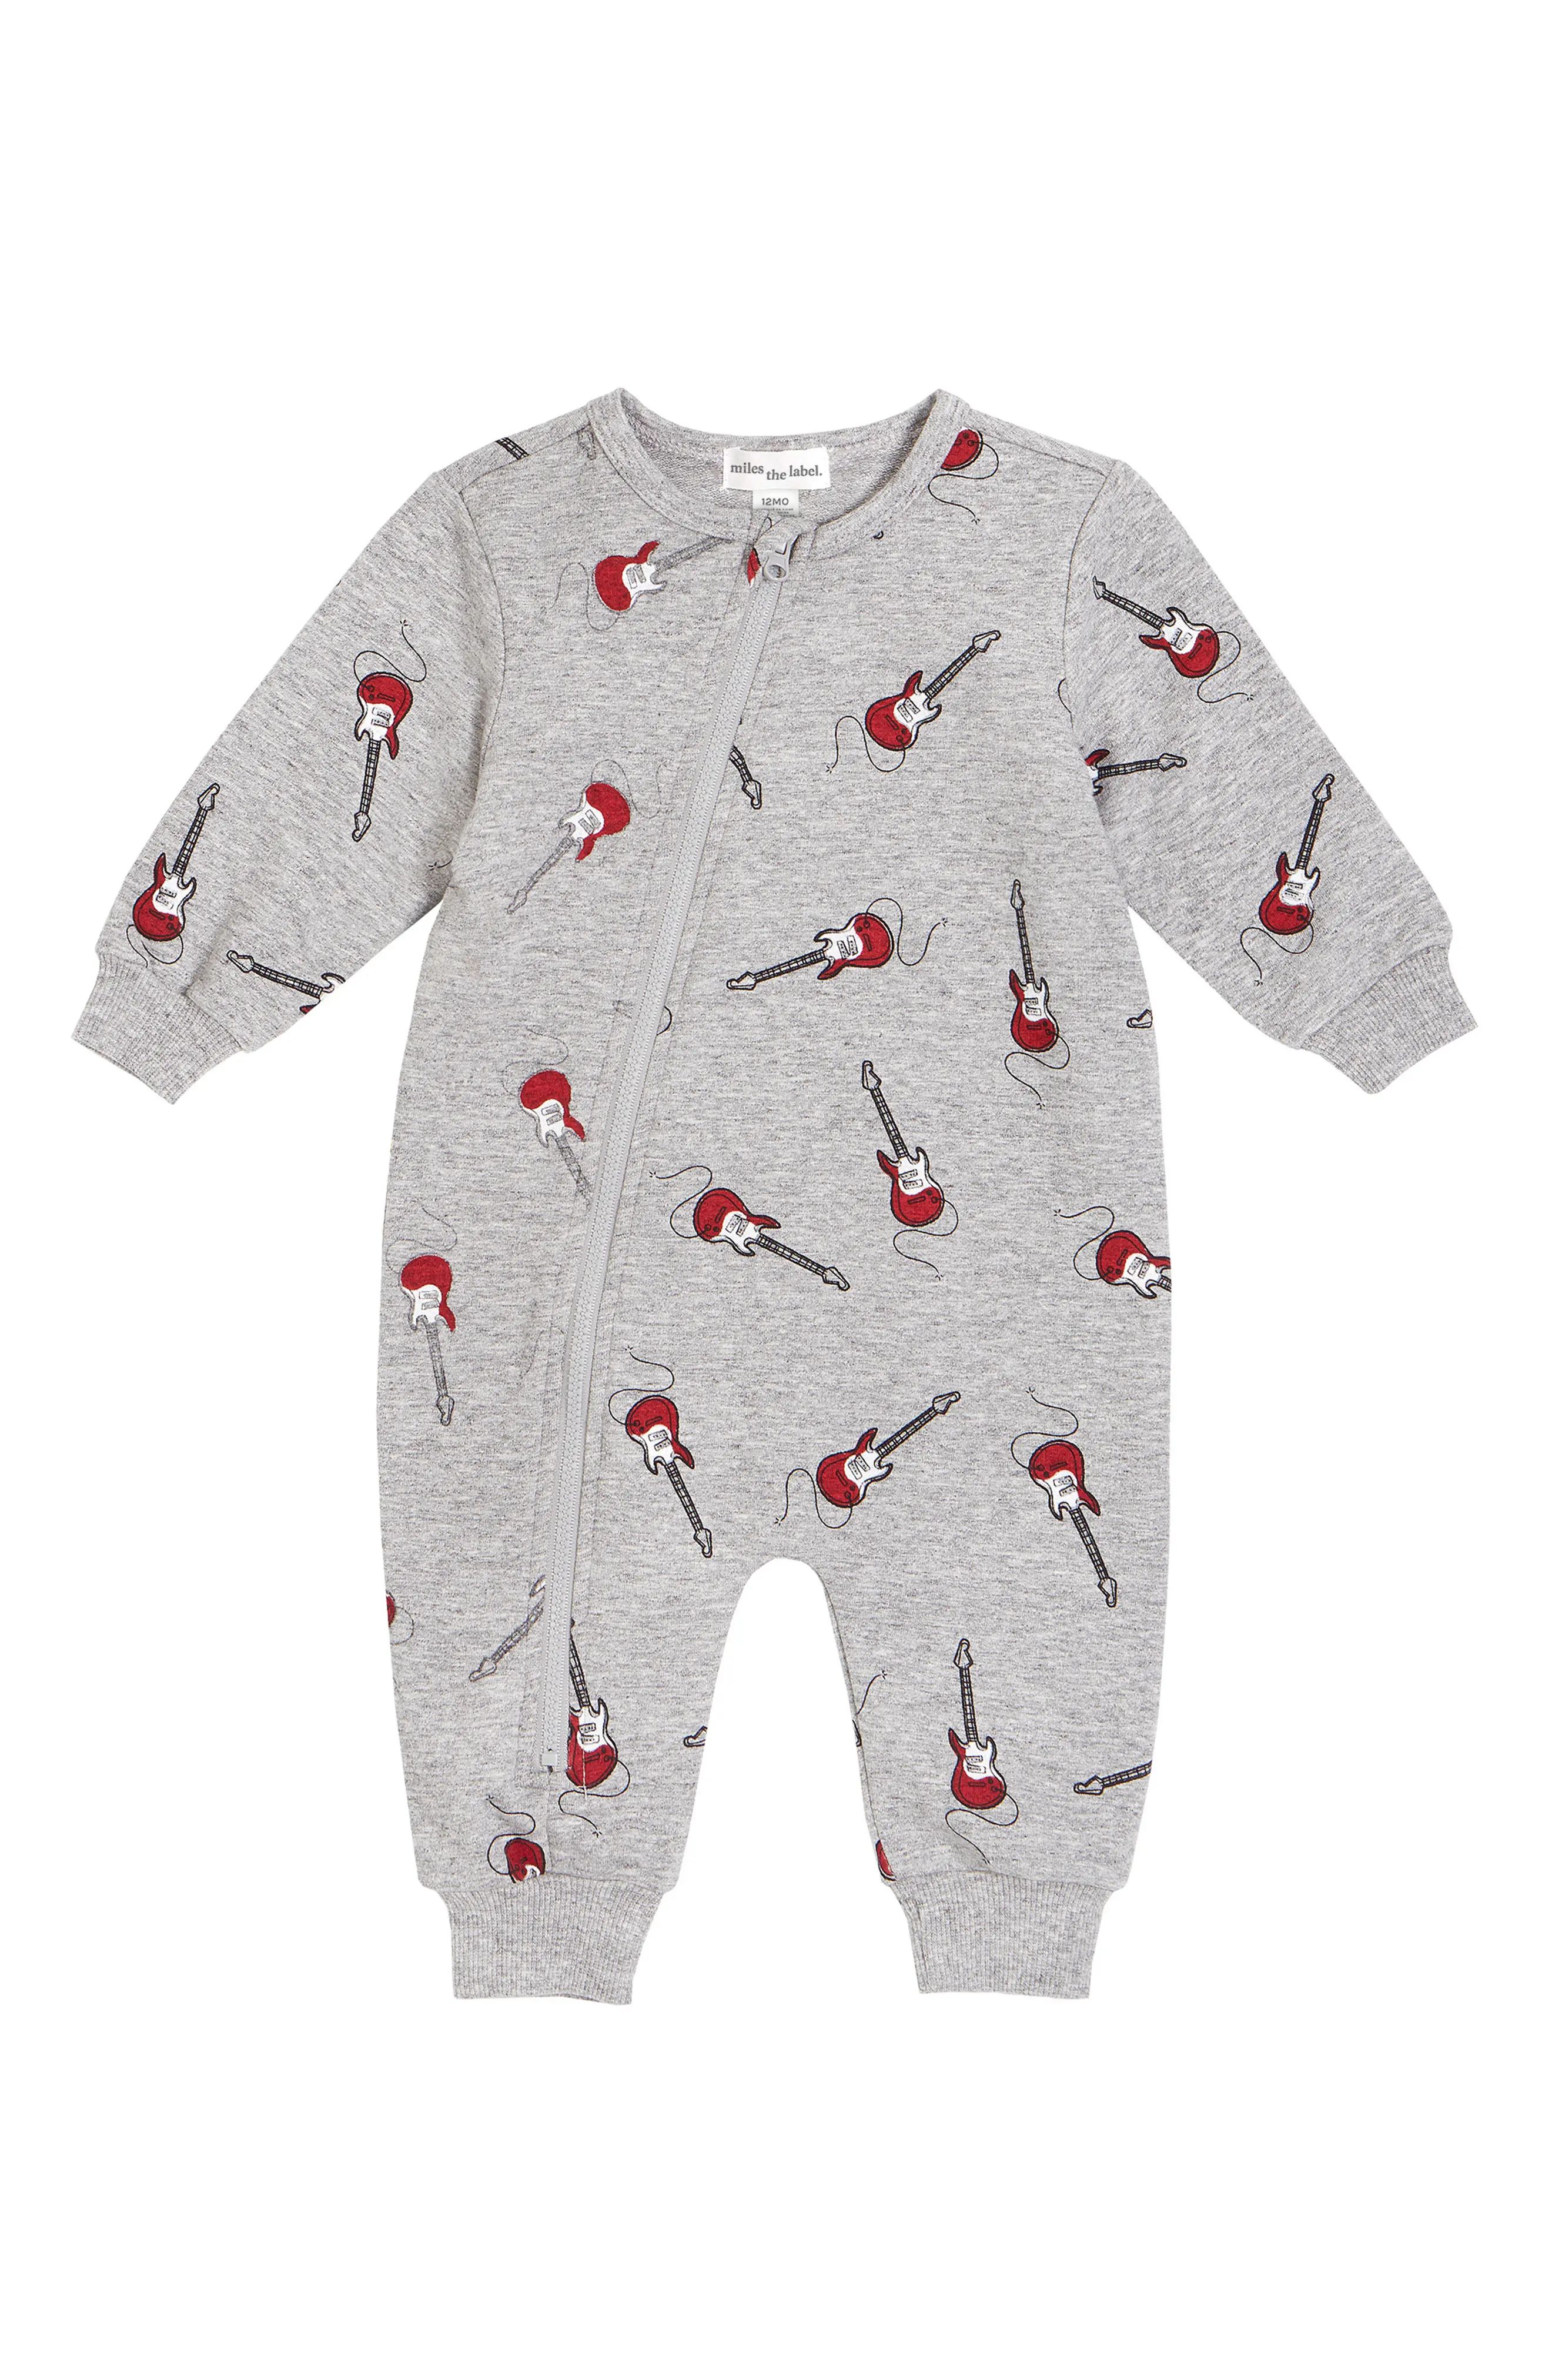 MILES THE LABEL miles Guitar Print Organic Cotton Romper, Size 6M in 905 Dk Heather Grey at Nordstro | Nordstrom